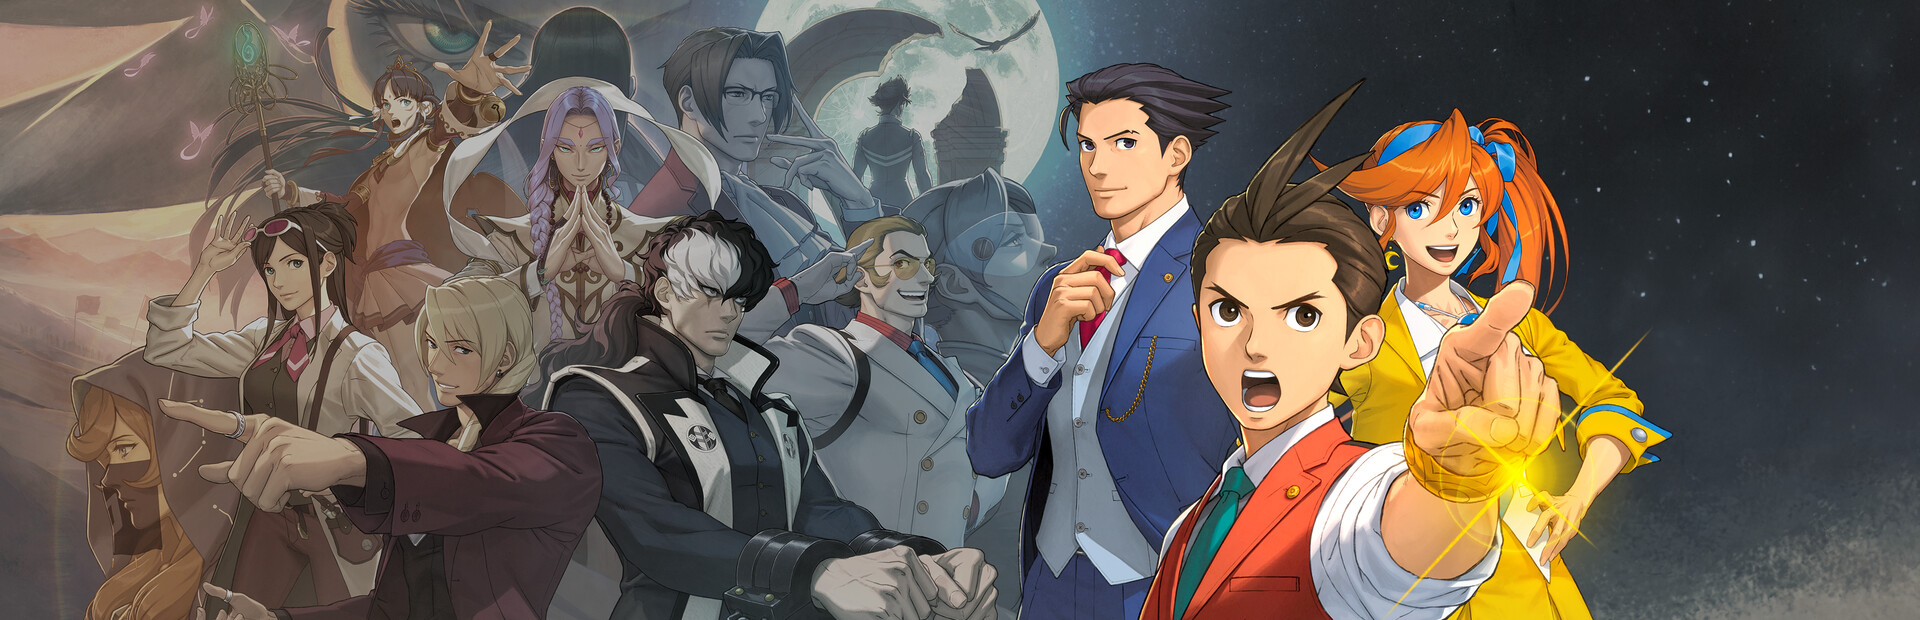 Apollo Justice: Ace Attorney Trilogy cover image